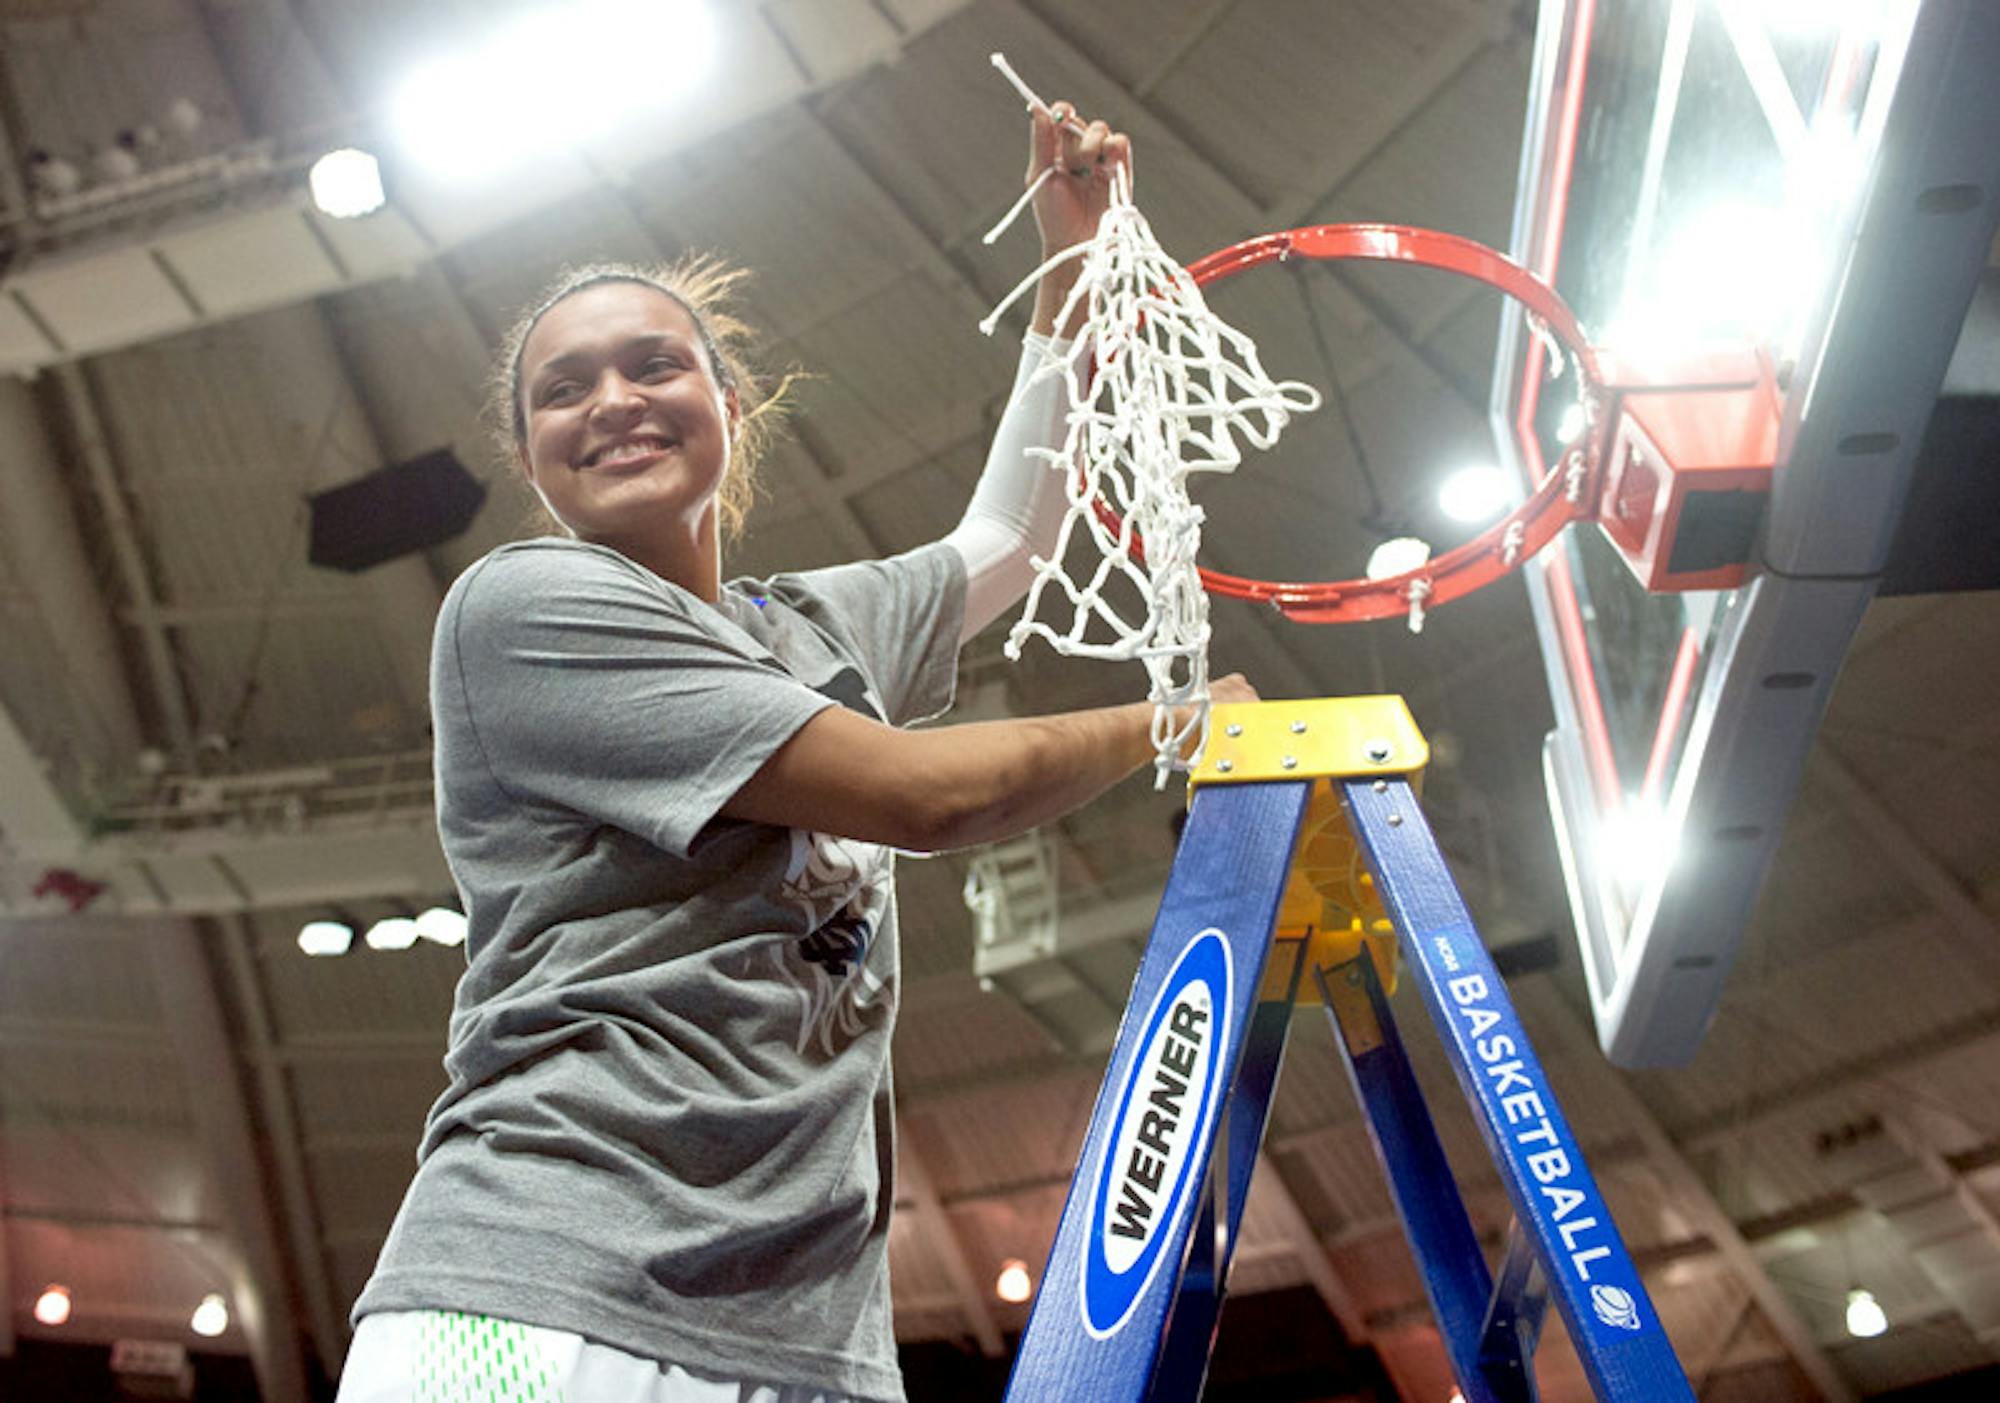 Irish senior guard Kayla McBride cuts down the net in Purcell Pavilion after Notre Dame defeated Baylor, 88-69, in the Elite Eight on Monday to advance to the Final Four in  Nashville, Tenn. Notre Dame squares off with Maryland on Sunday night in one of the national semifinals.